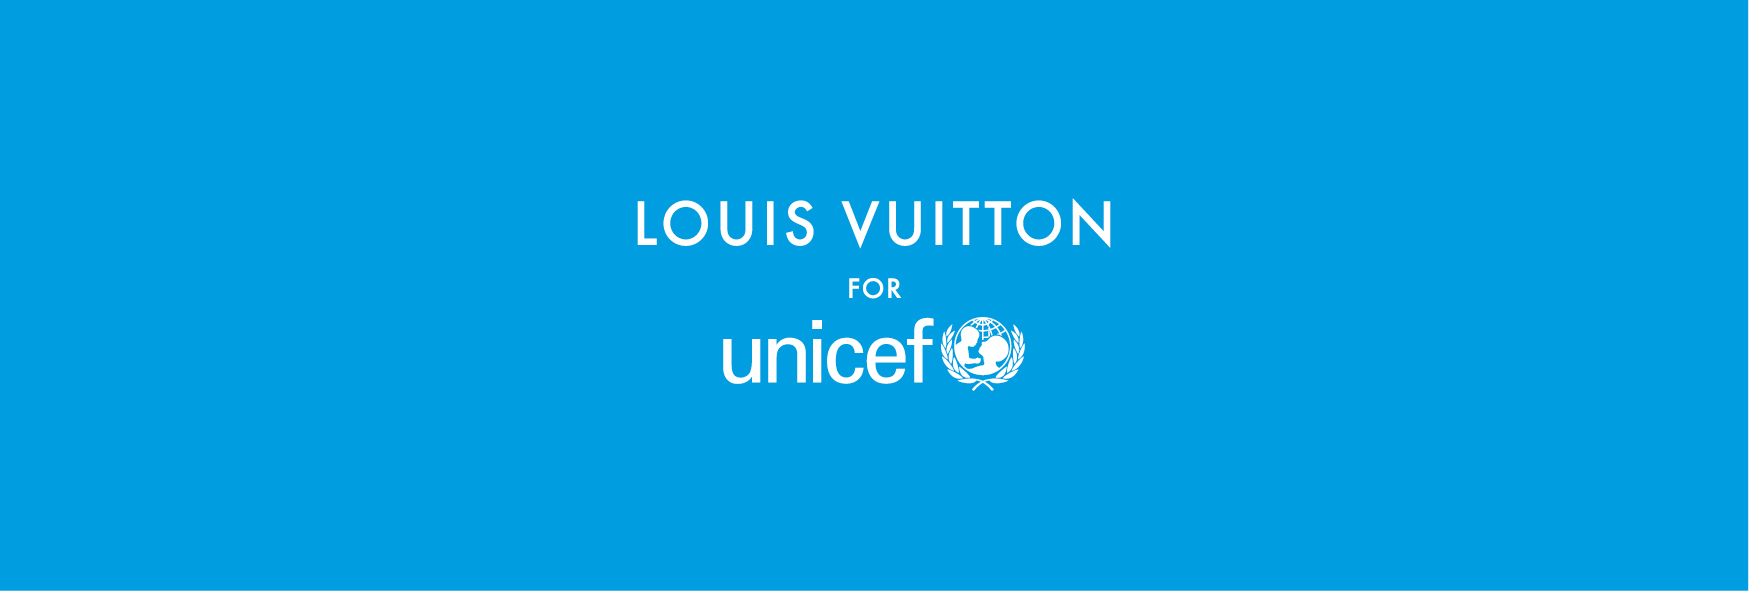 Buy a Louis Vuitton Lockit, give $200 to UNICEF